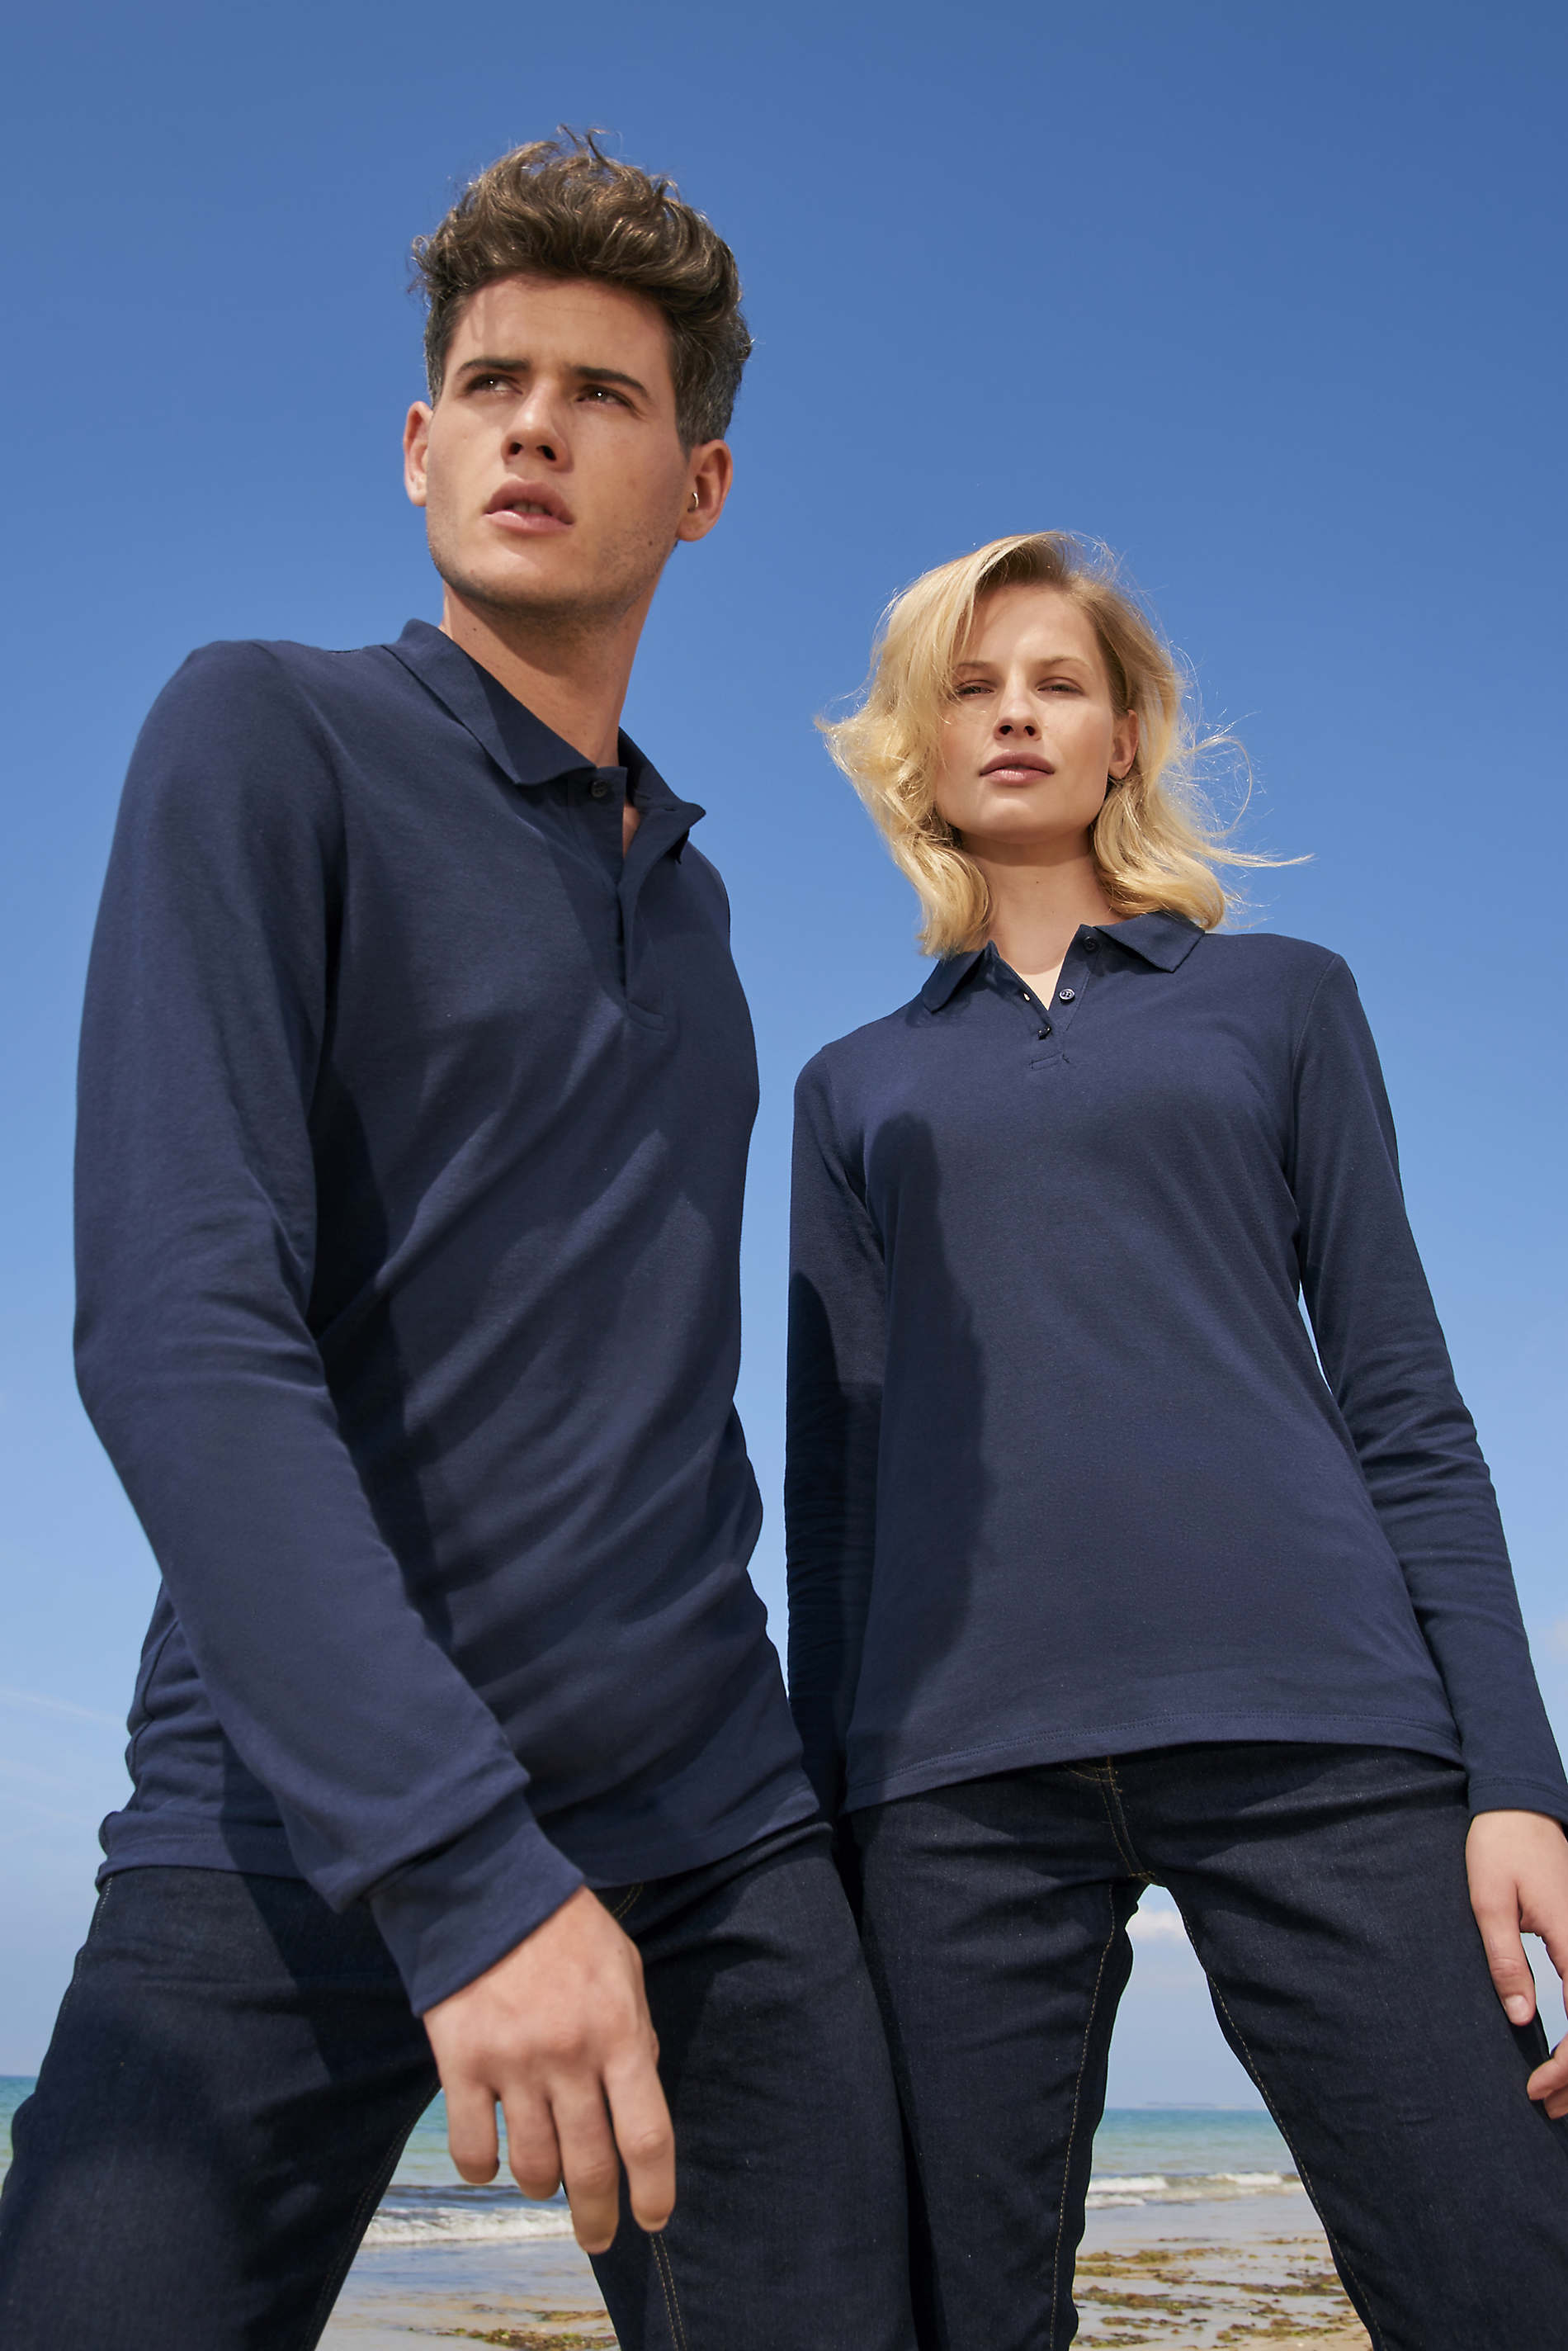 Polo Perfect LSL - Homme